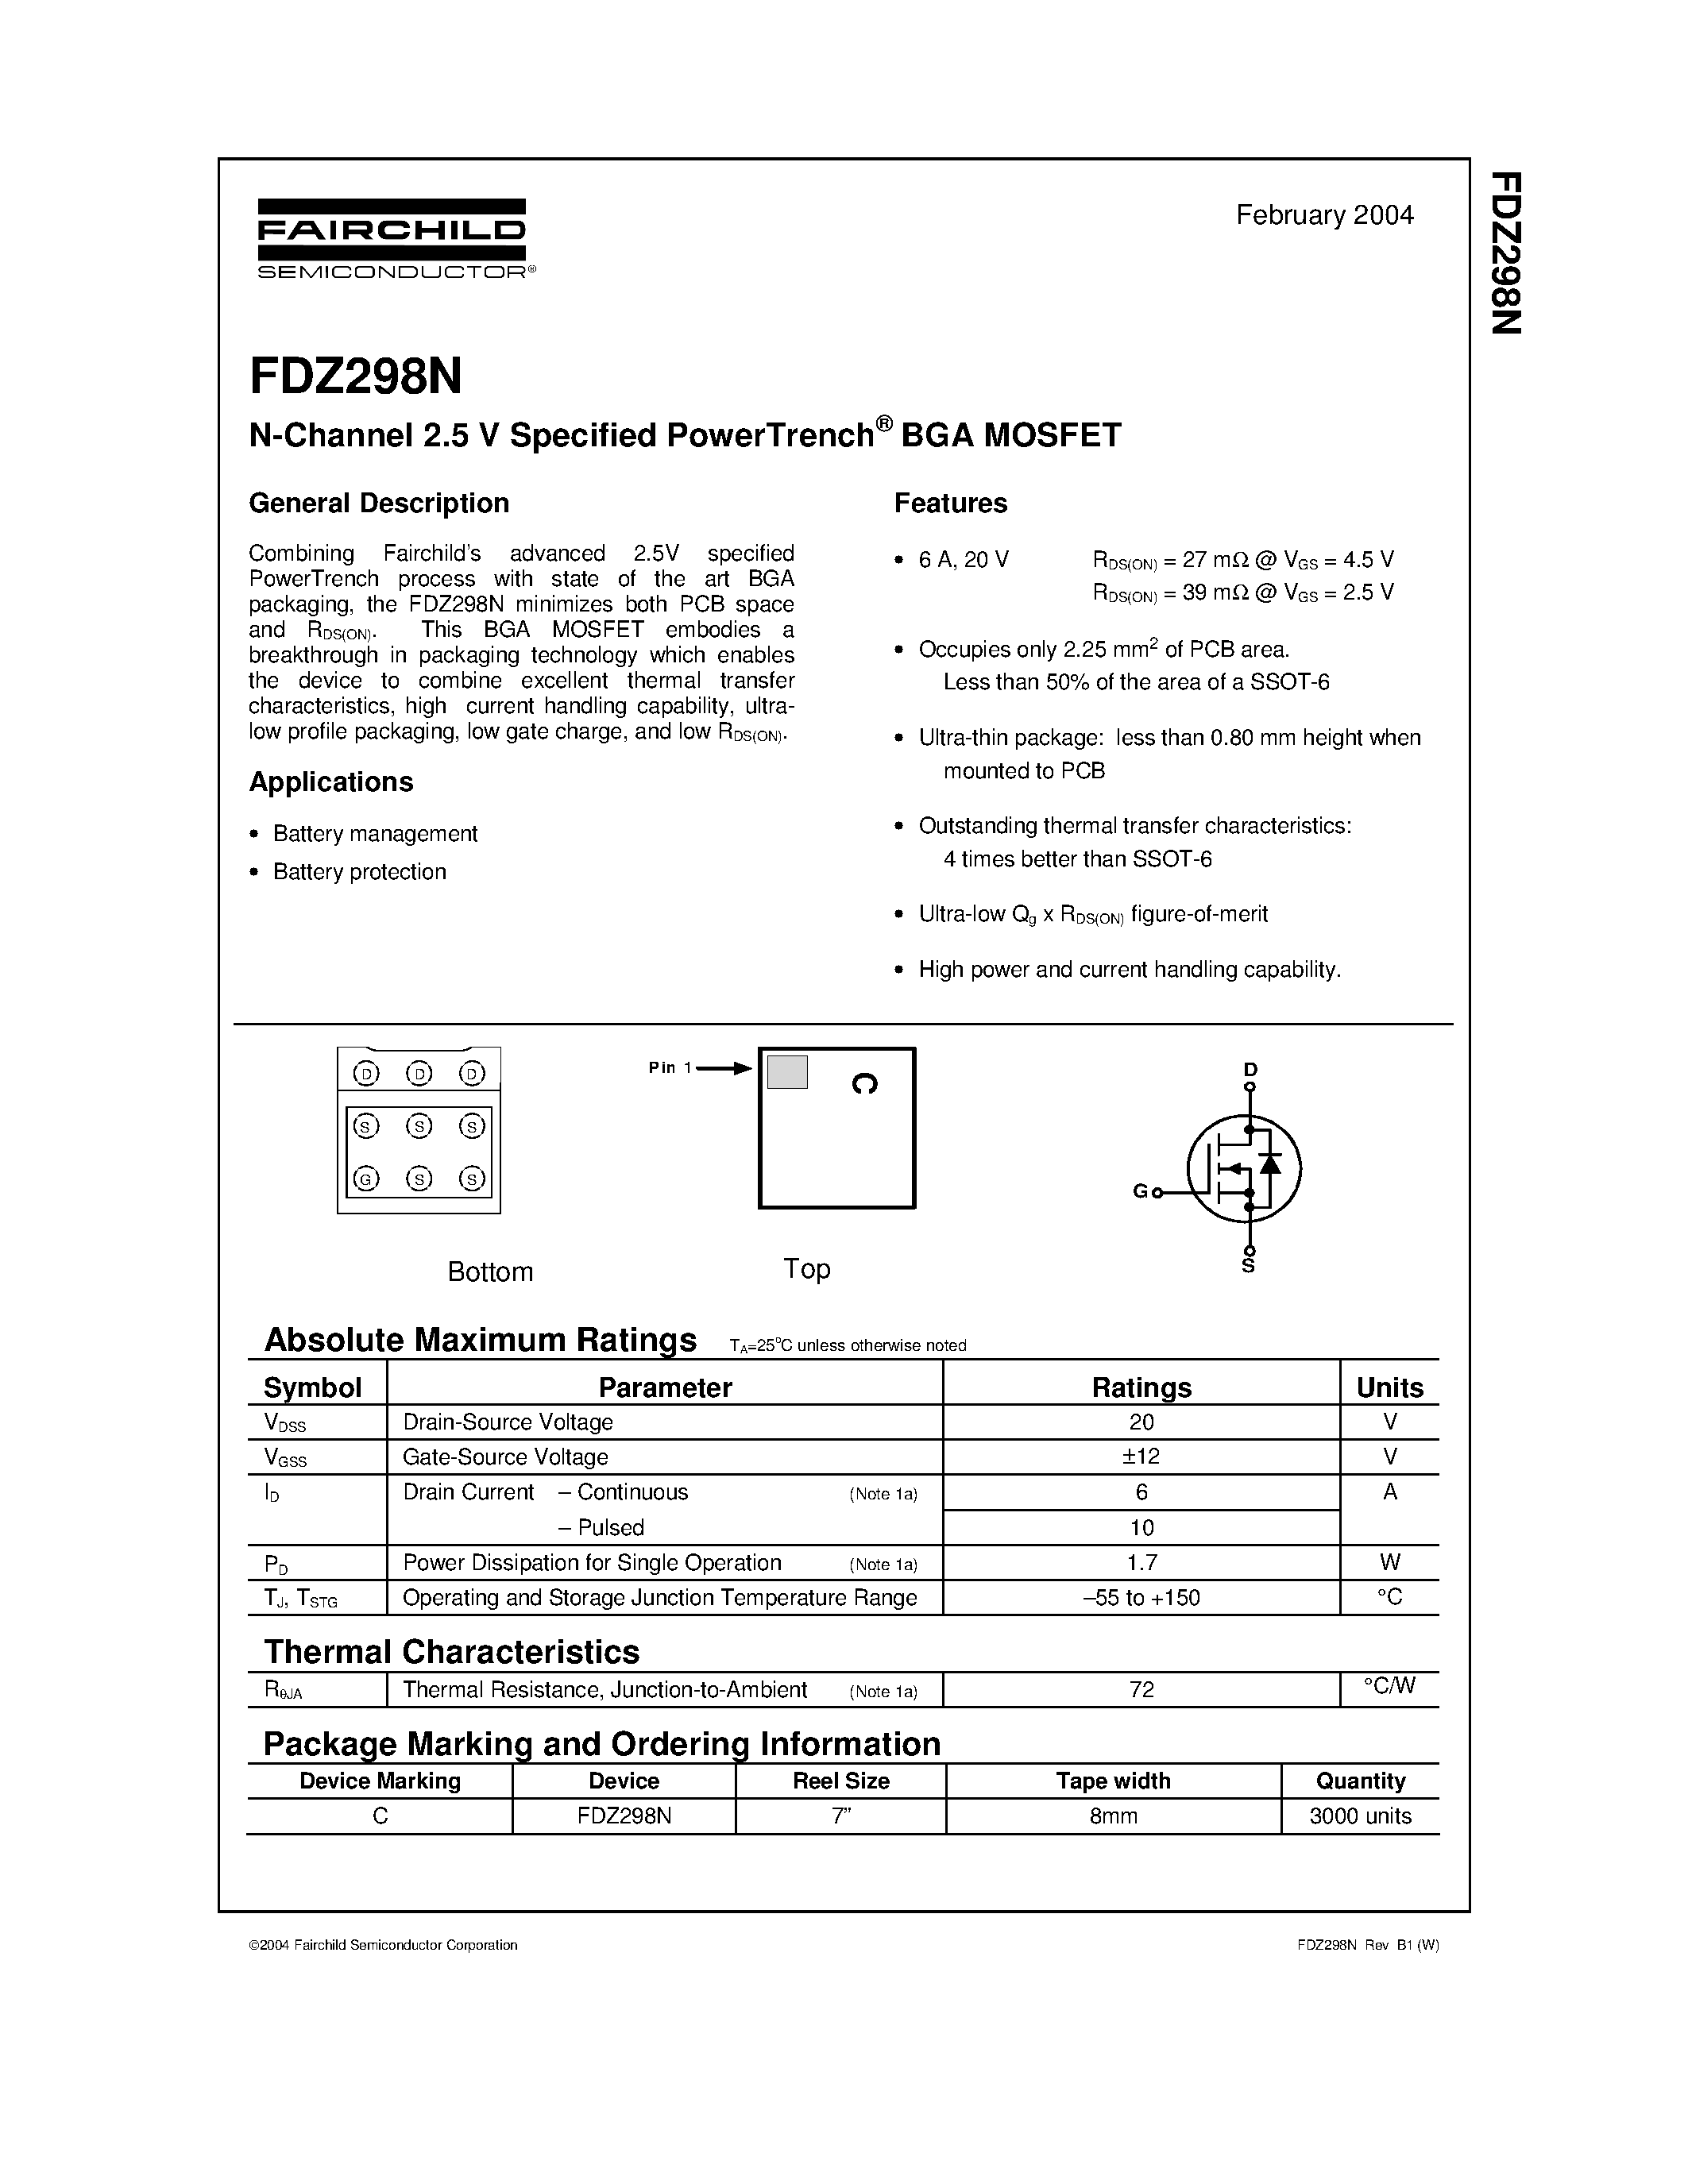 Datasheet FDZ298N - N-Channel 2.5 V Specified PowerTrench BGA MOSFET page 1